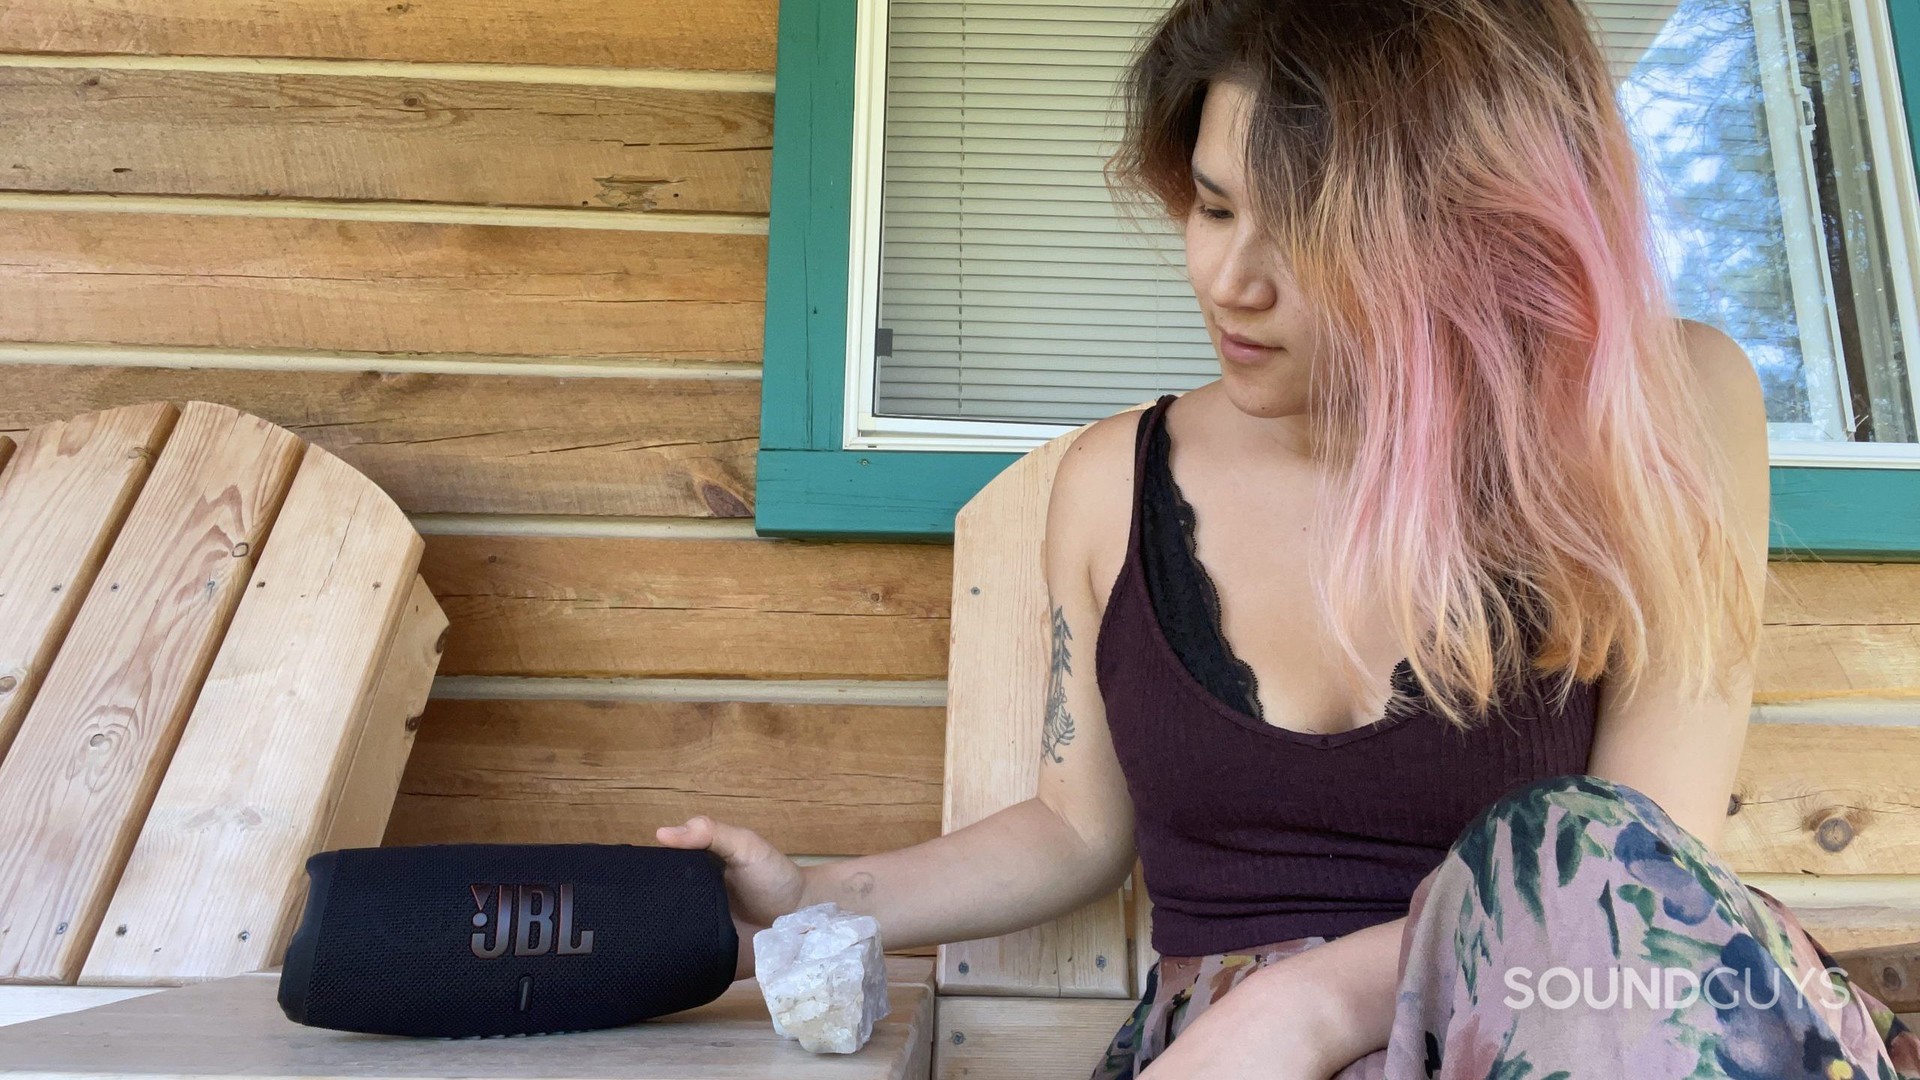 A woman touches the JBL Charge 5 as it rests on a table on a porch outdoors.